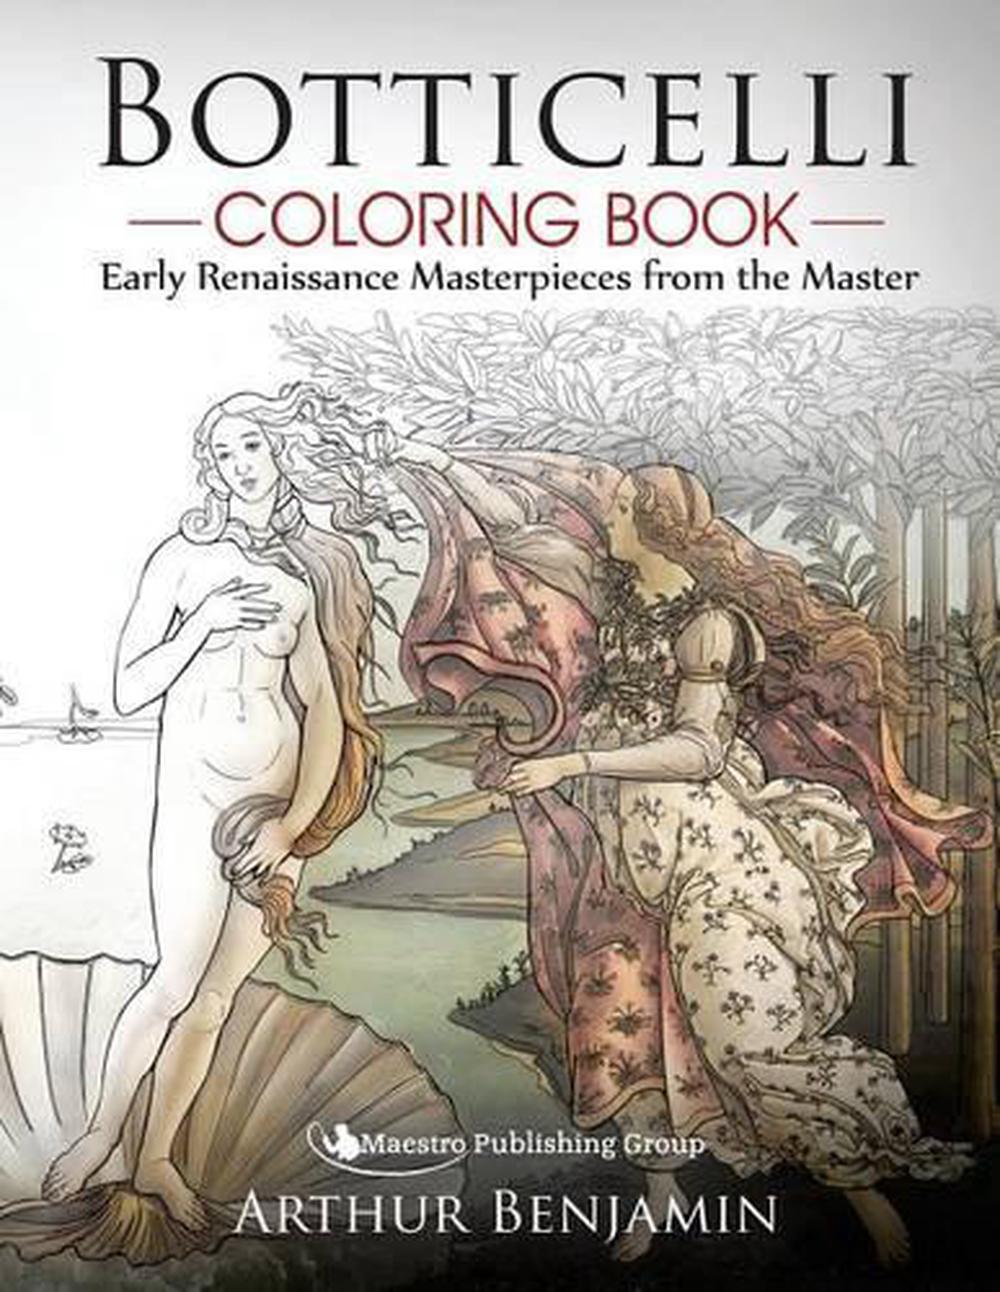 Botticelli Coloring Book: Early Renaissance Masterpieces from the